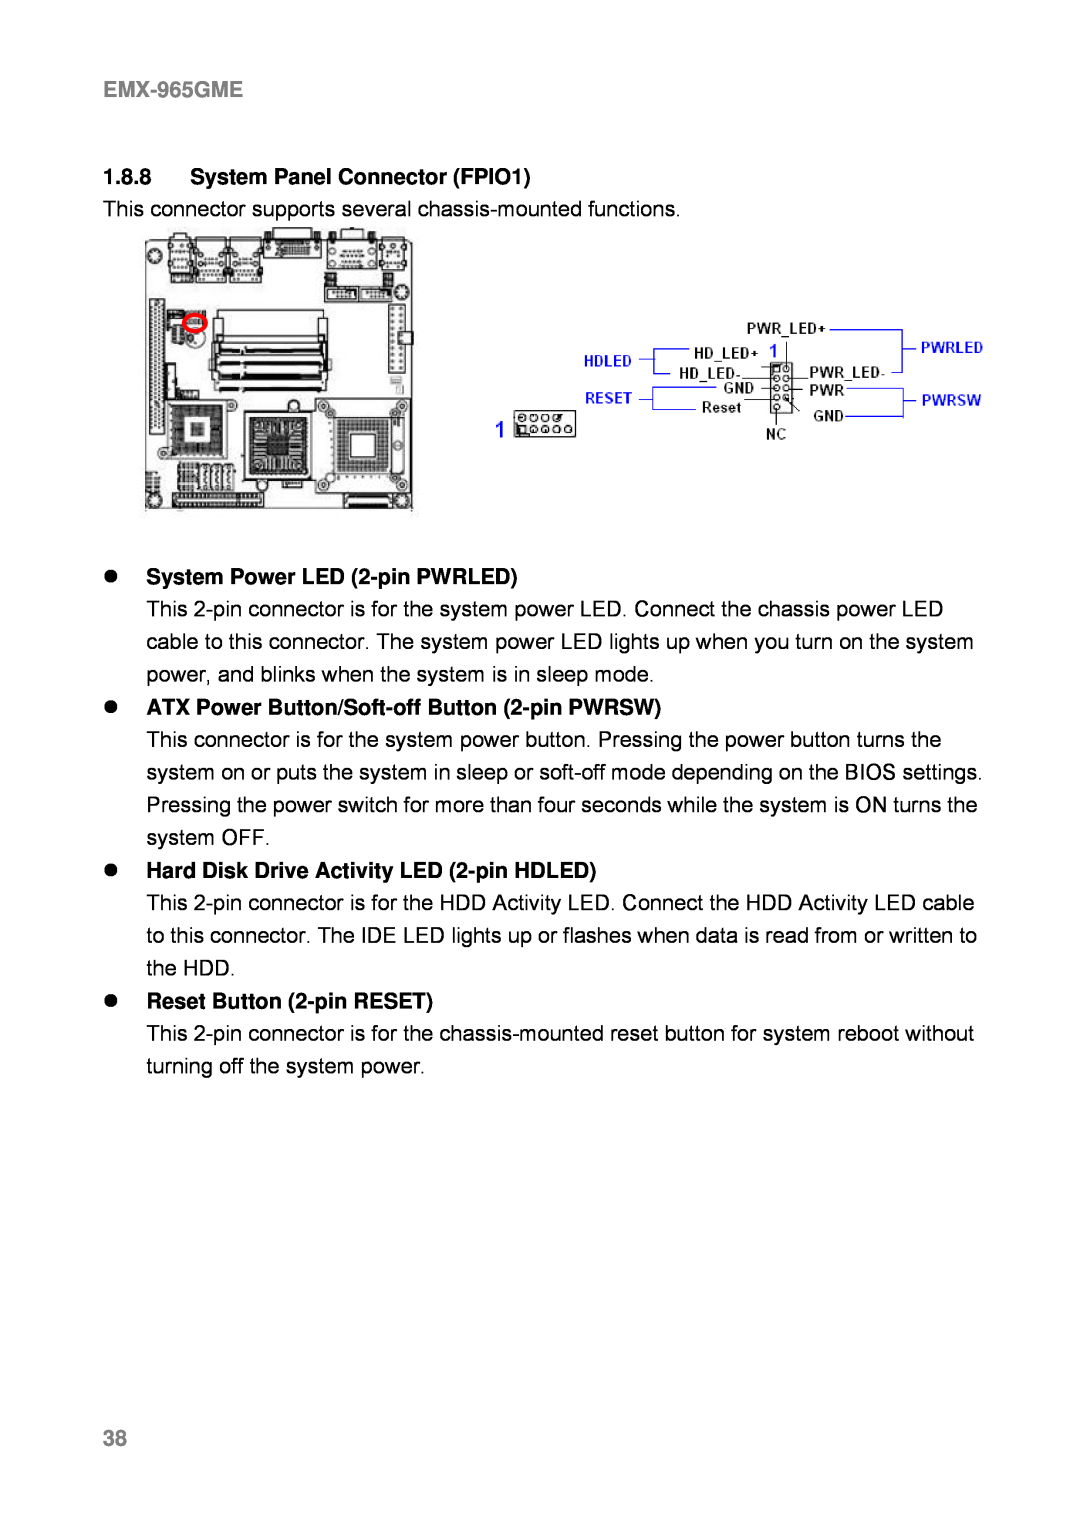 Intel EMX-965GME user manual 1.8.8System Panel Connector FPIO1, zSystem Power LED 2-pinPWRLED, zReset Button 2-pinRESET 